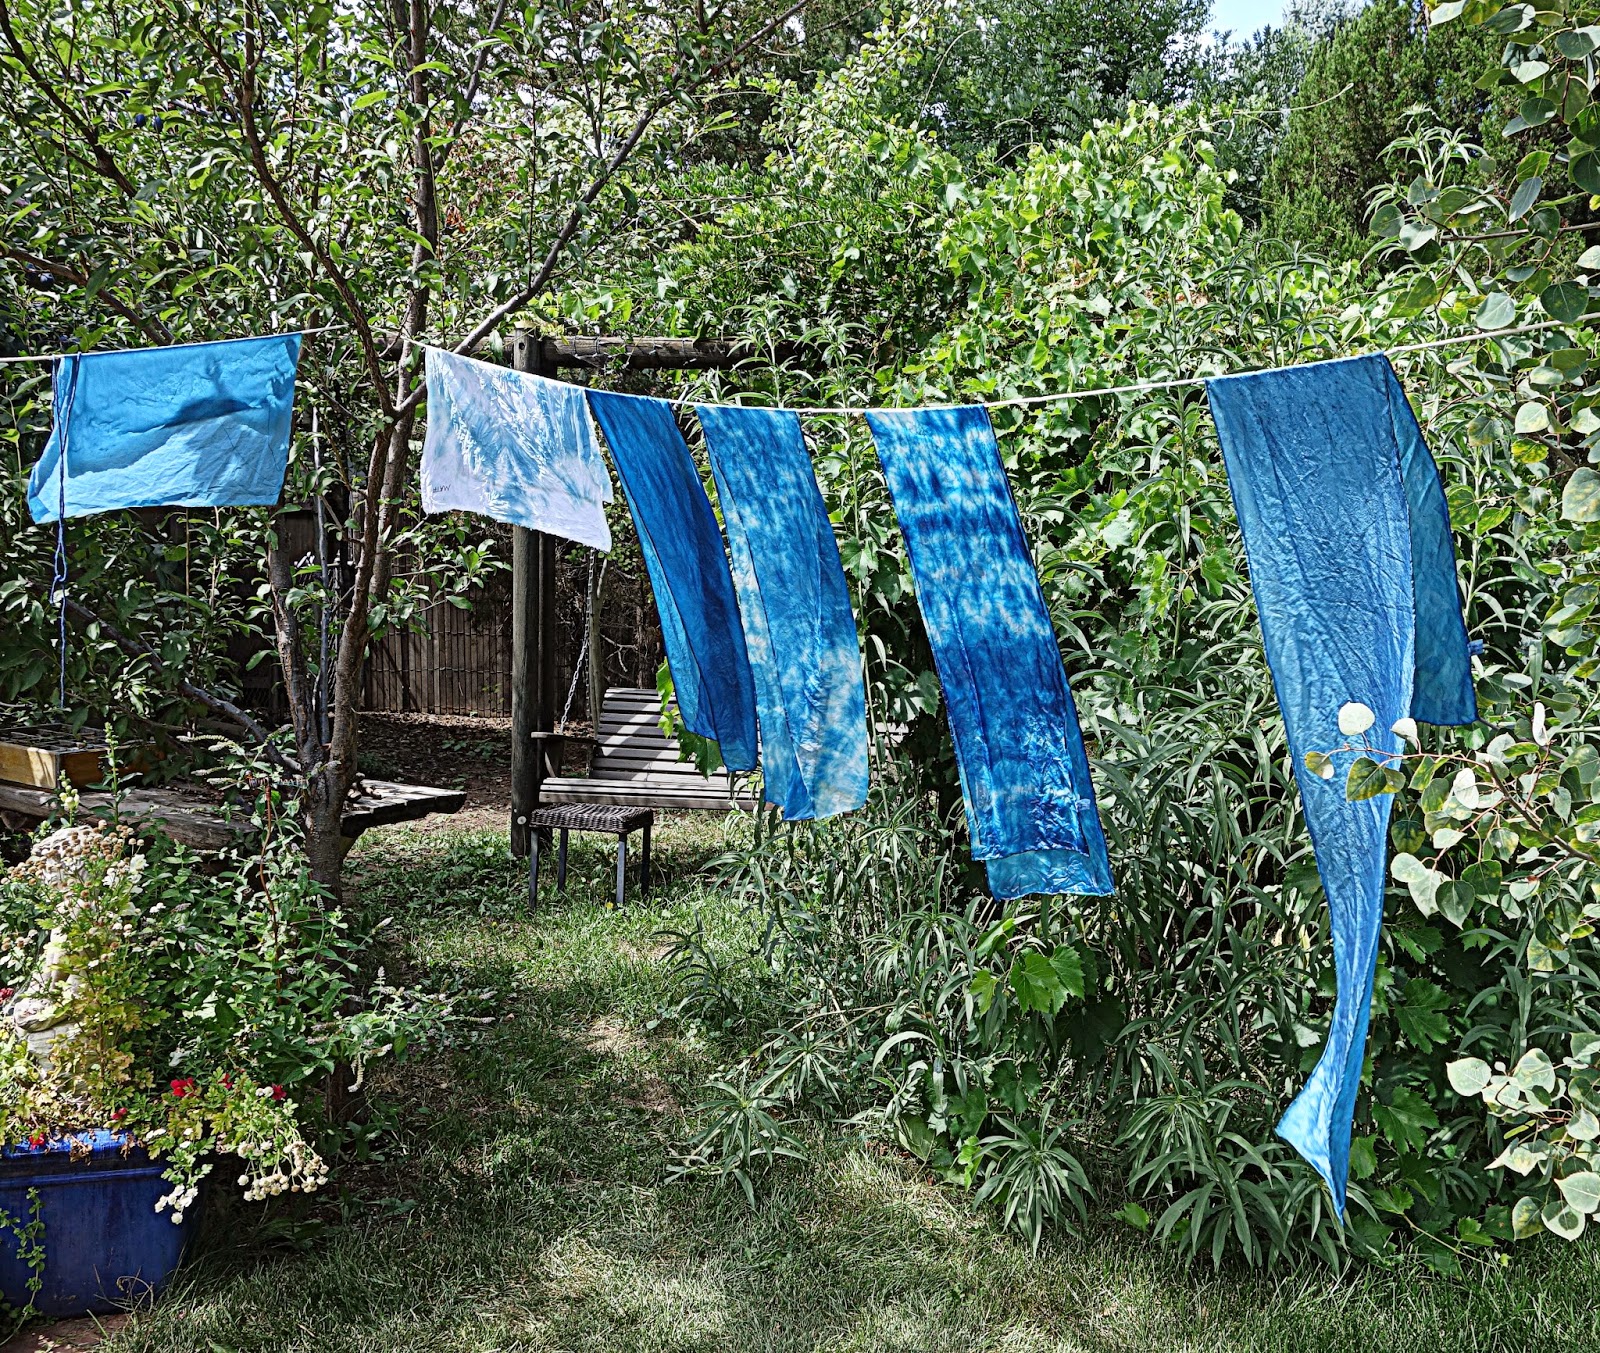 woman with wings: clothesline strung and blues hung